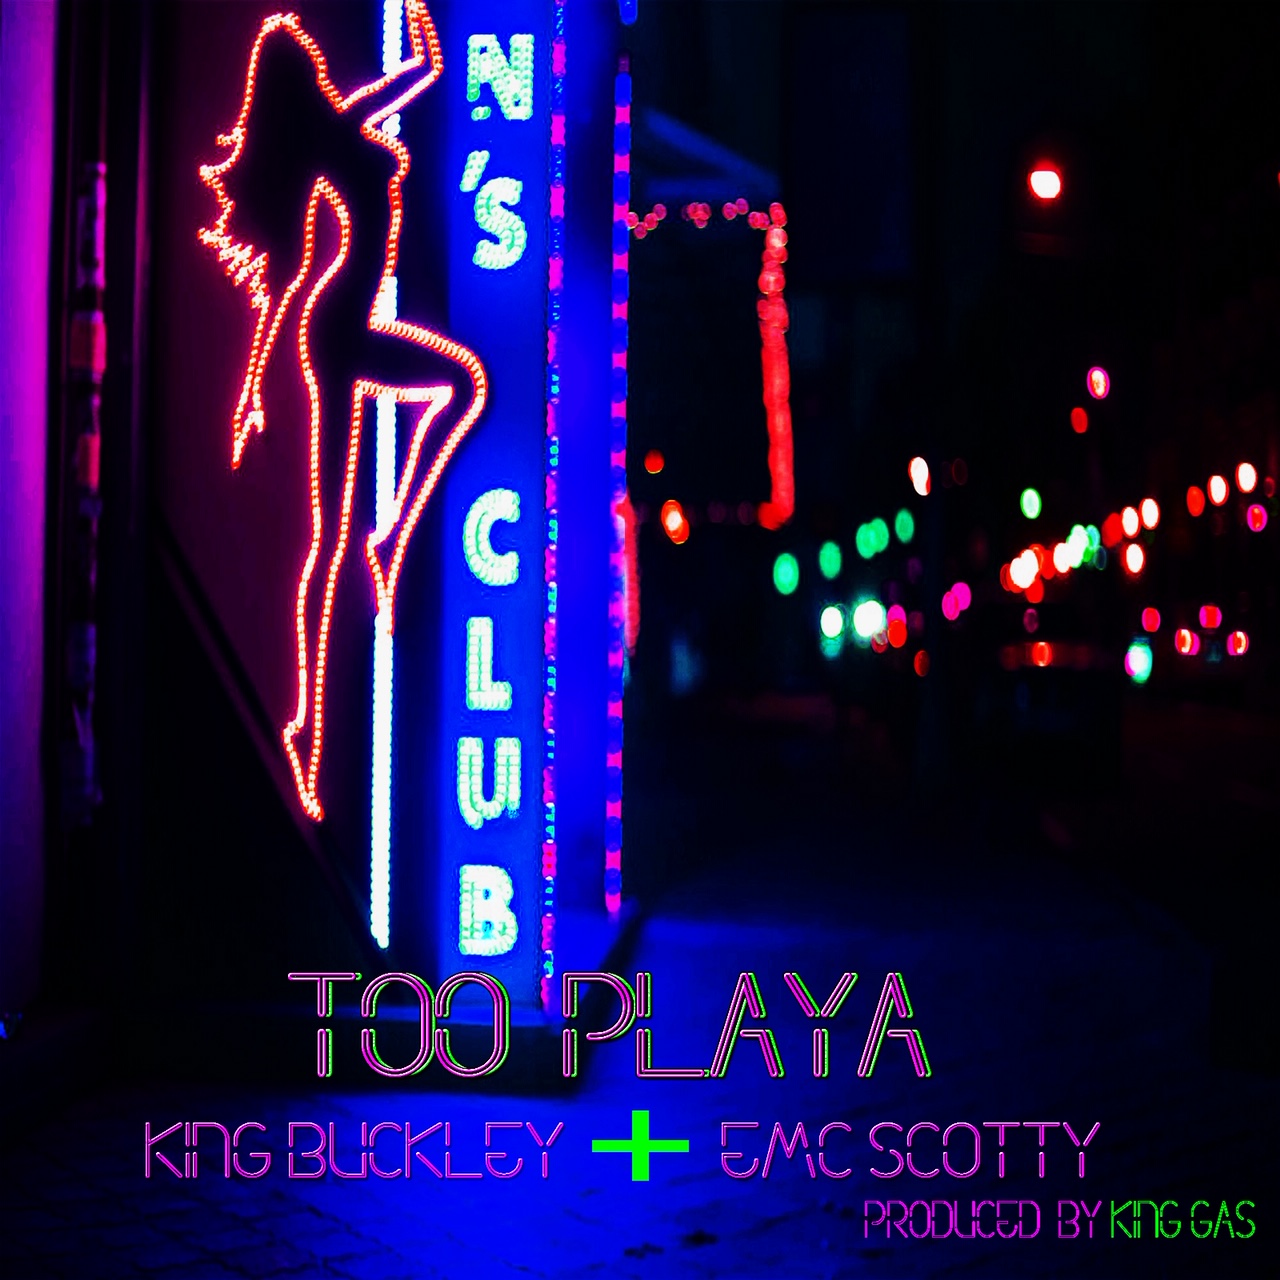 King Buckley aims for the female passion with new single “Too Playa” @realkingbuckley